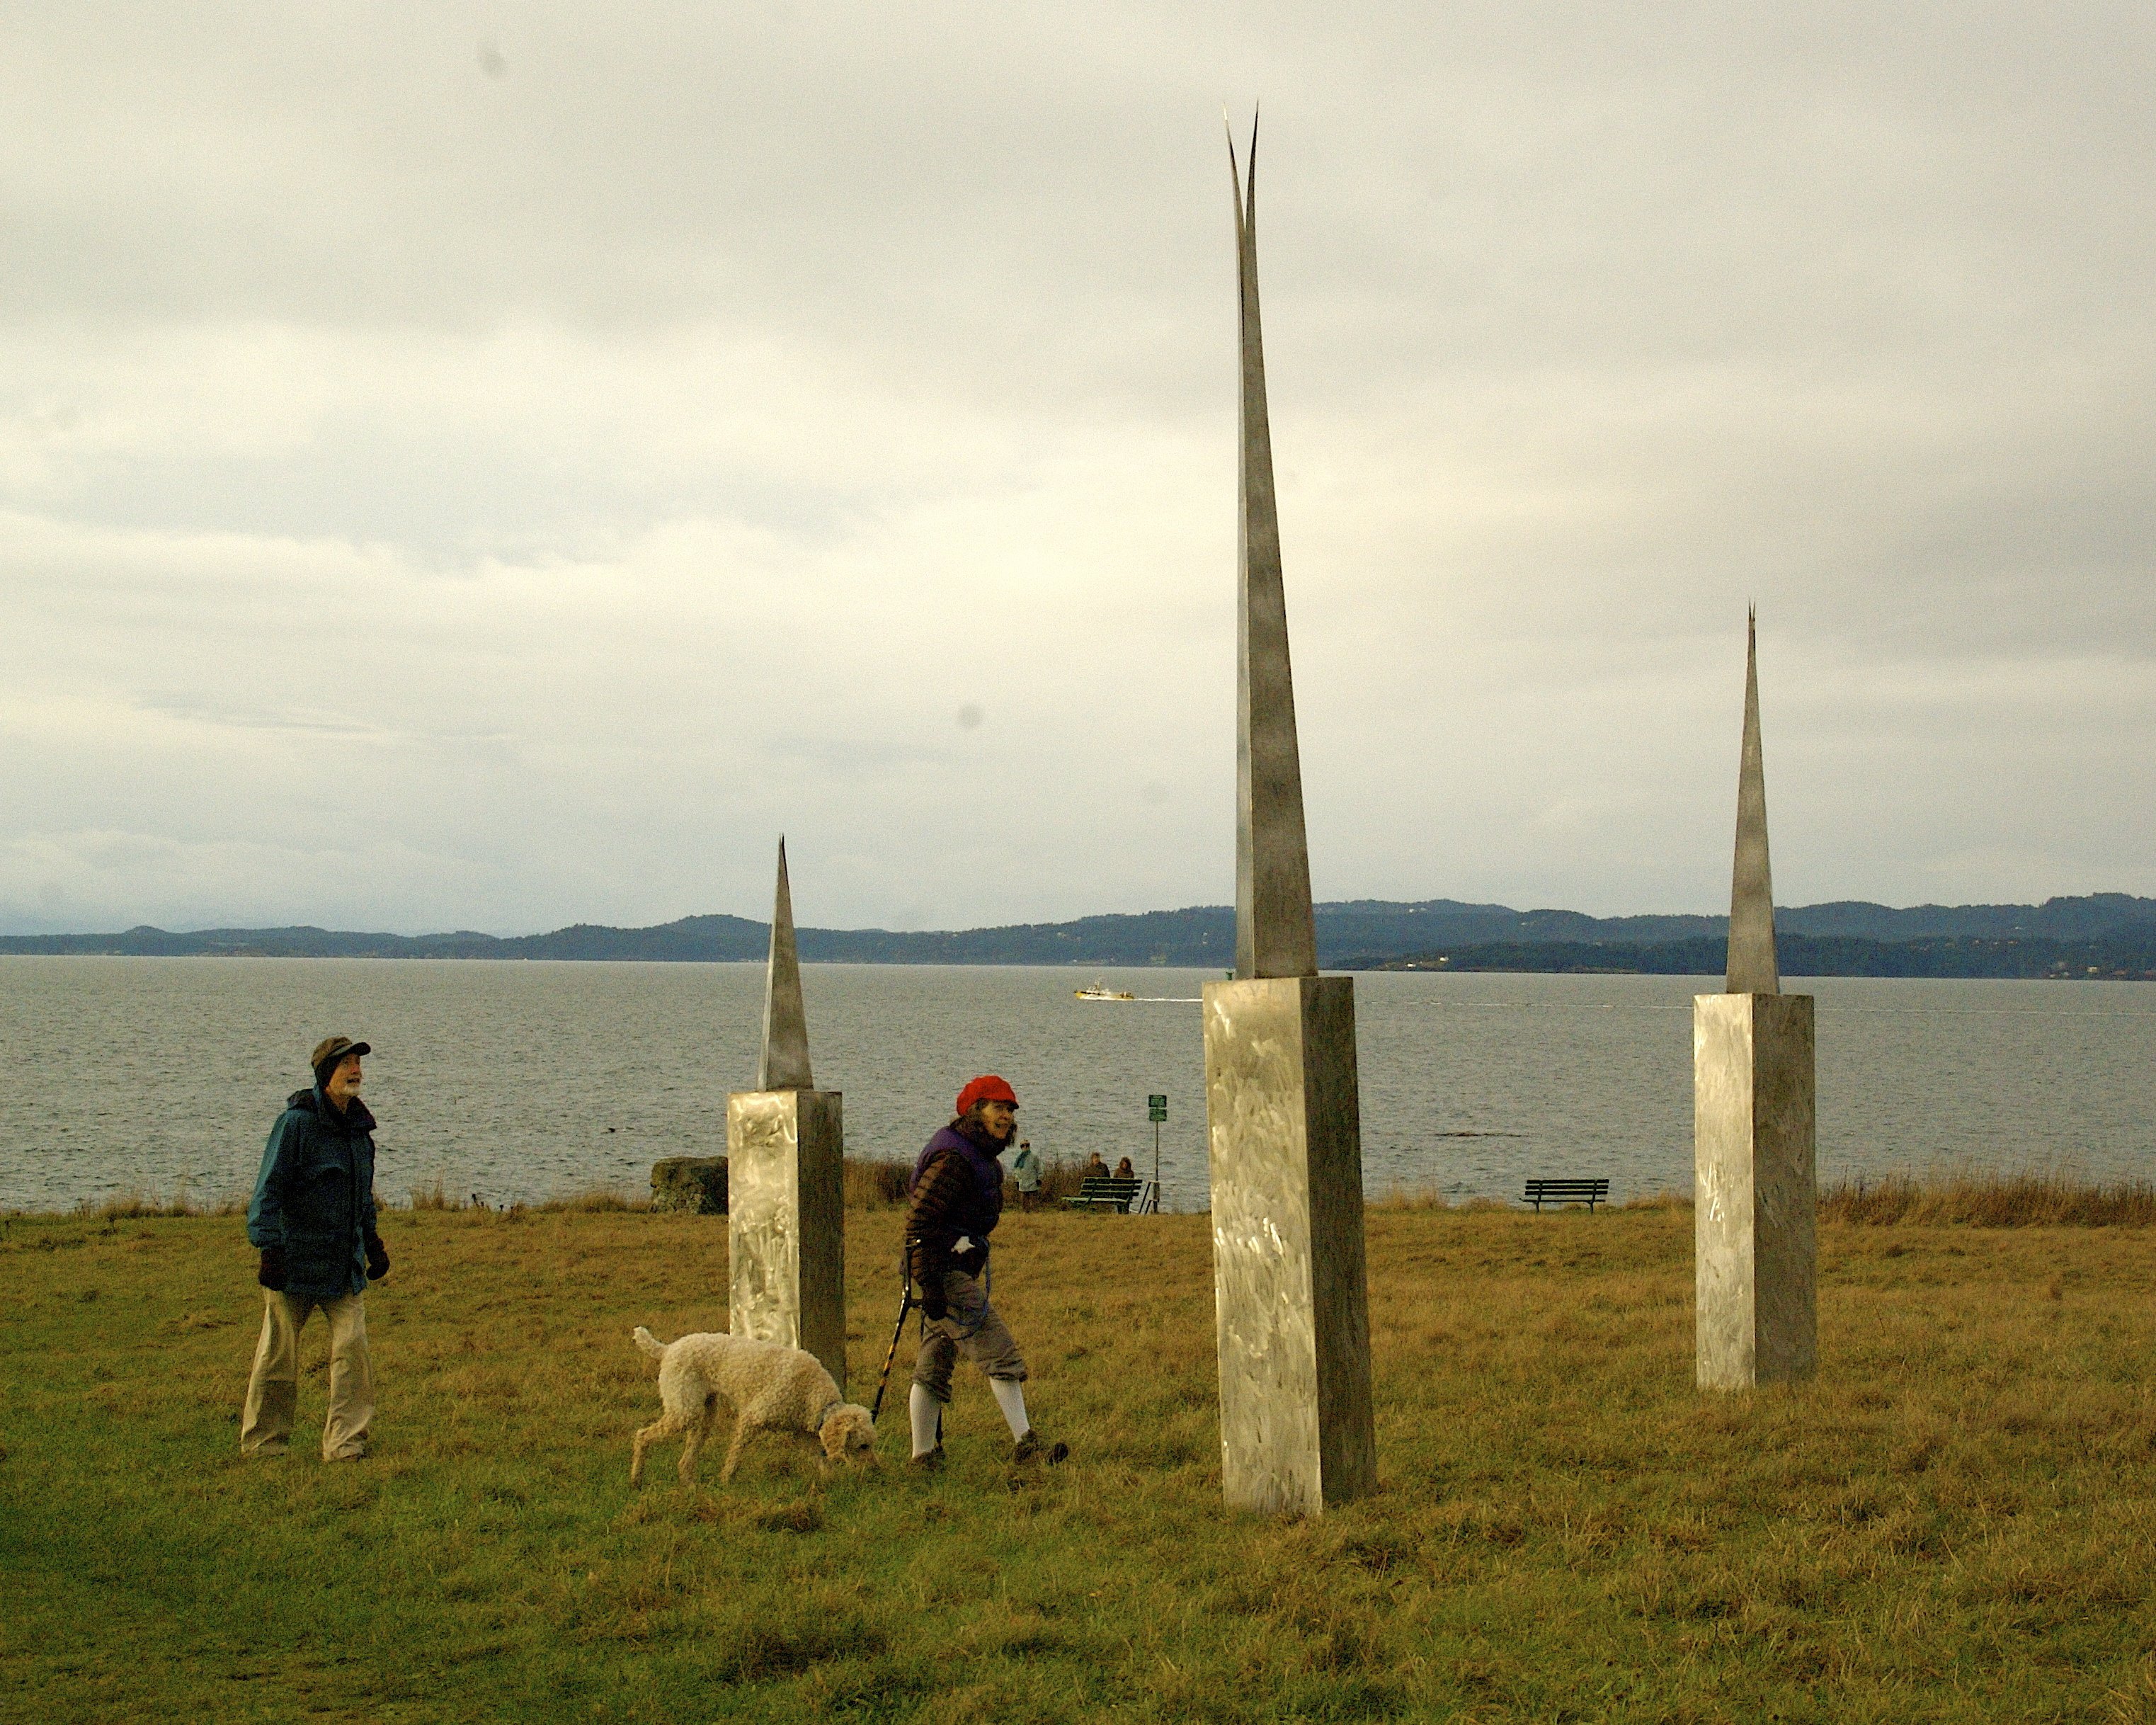 Picture of sculpture showing people beside it for scale.